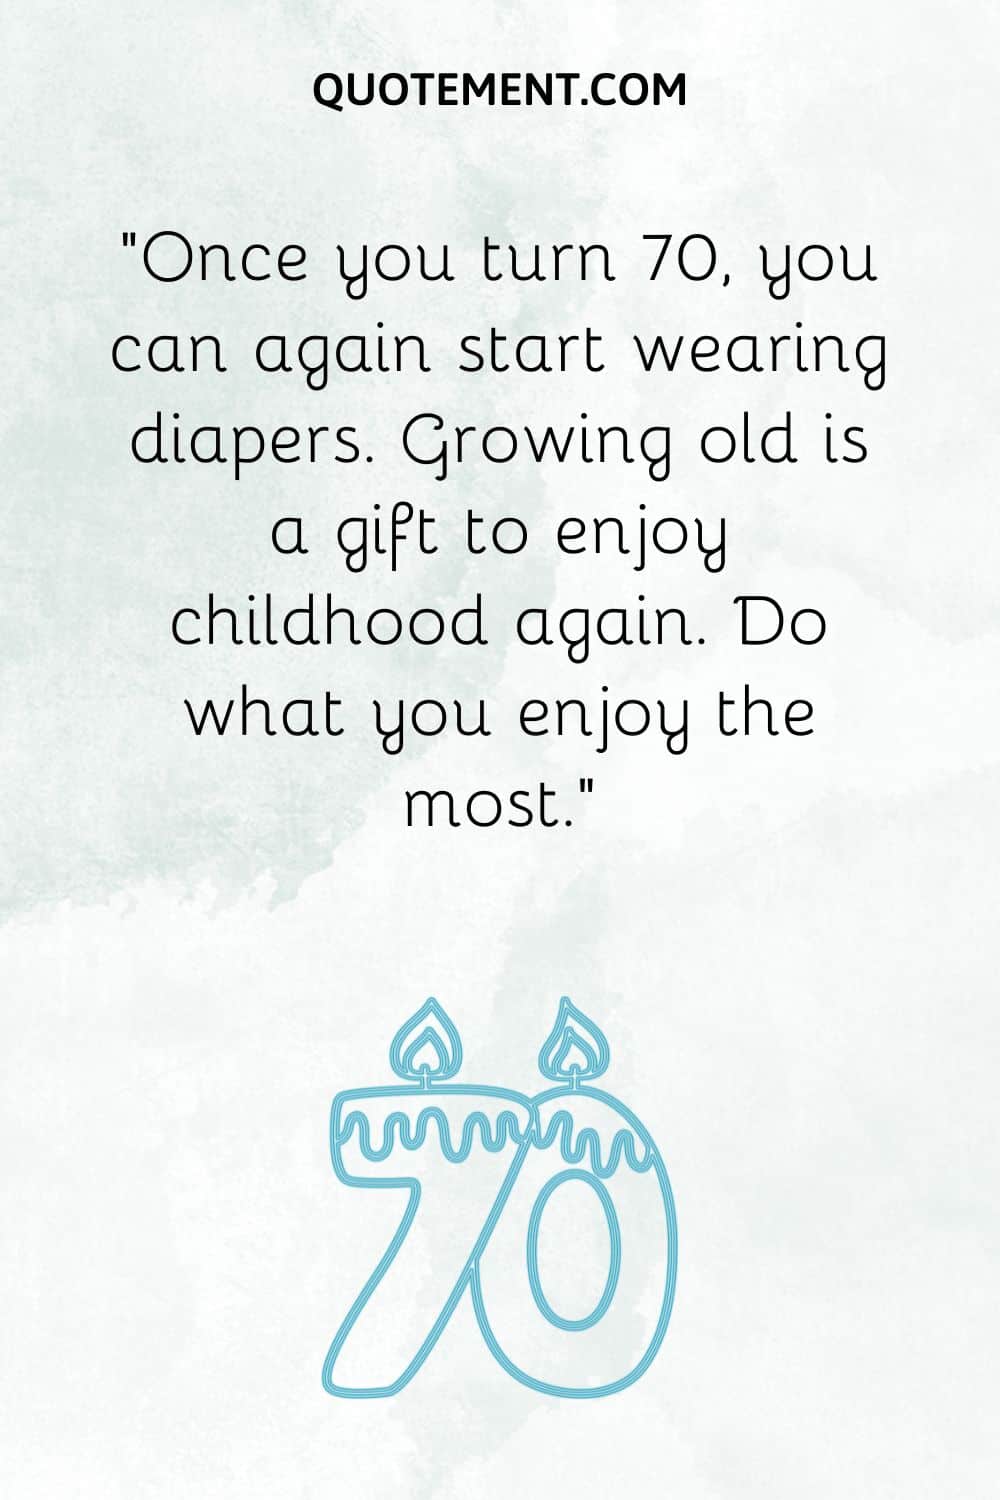 “Once you turn 70, you can again start wearing diapers. Growing old is a gift to enjoy childhood again. Do what you enjoy the most.”